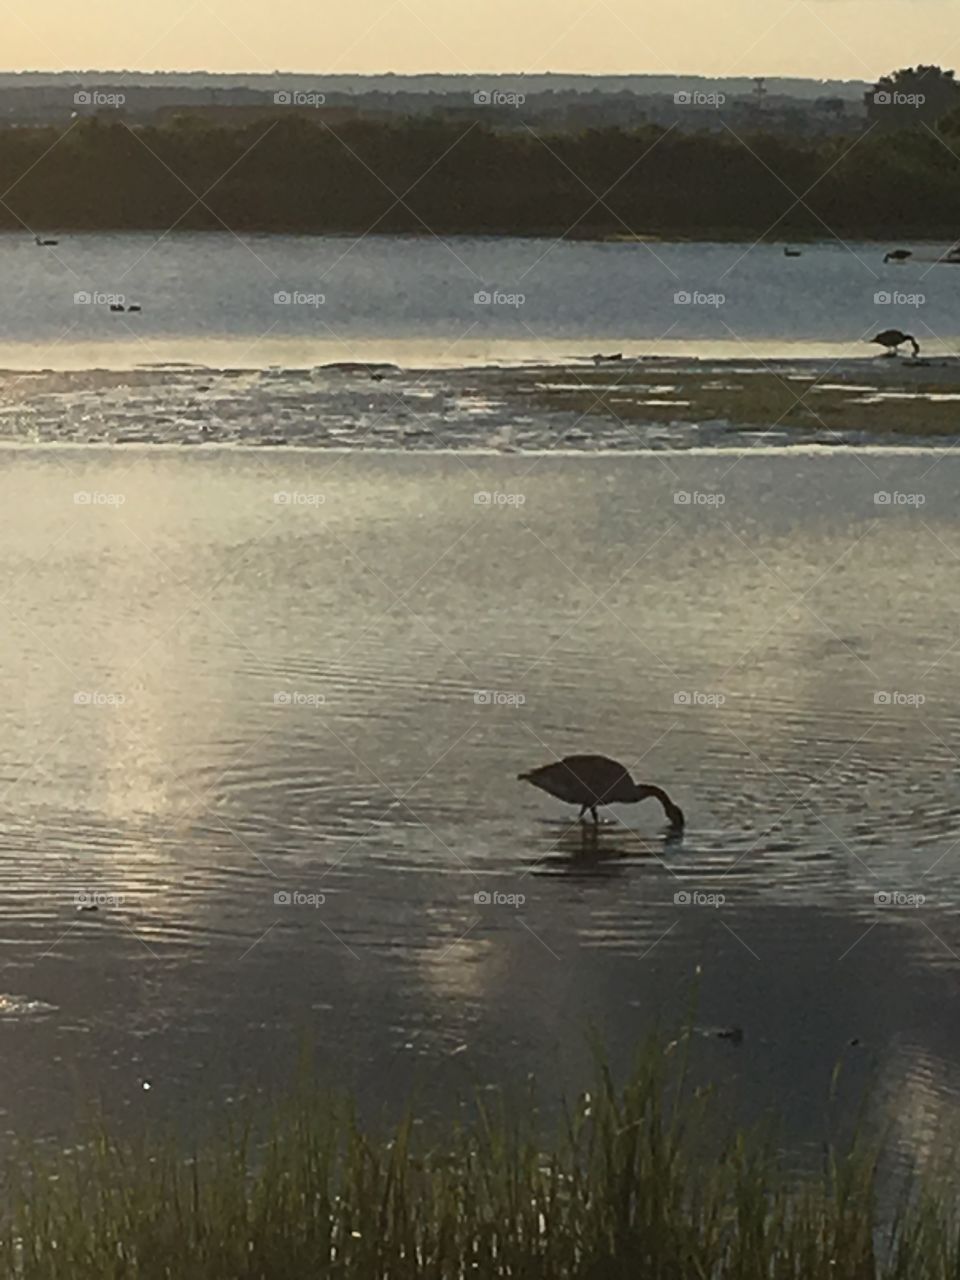 Canada goose silhouetted feeding in shallow marshy bay at dusk